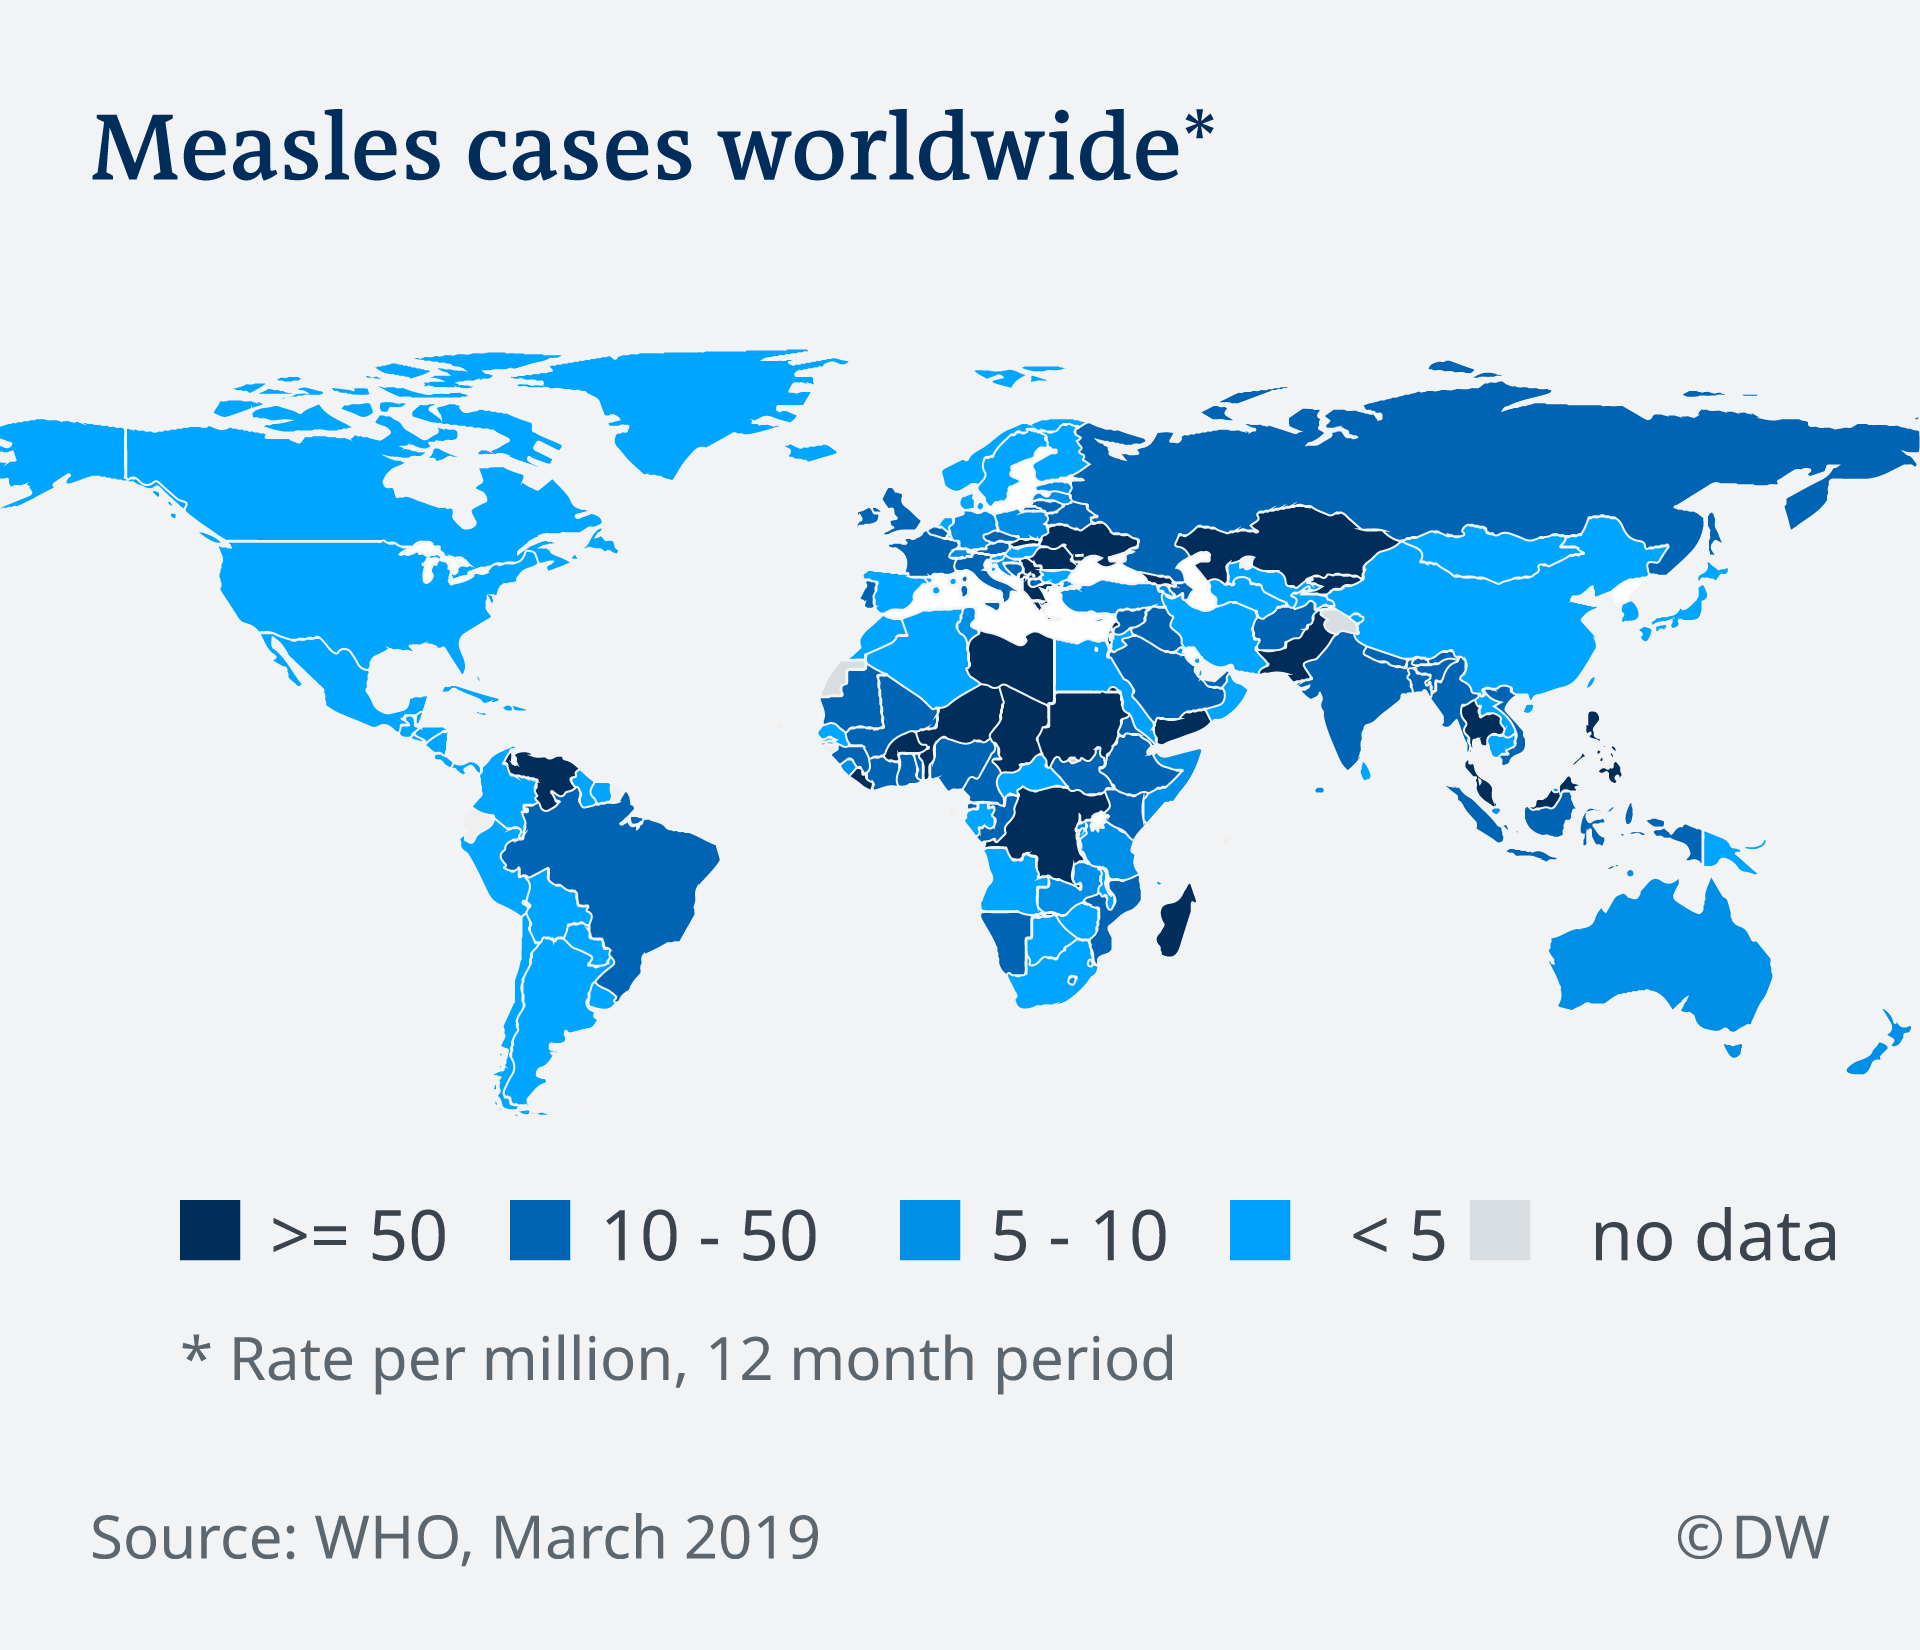 Map showing number of measles cases worldwide